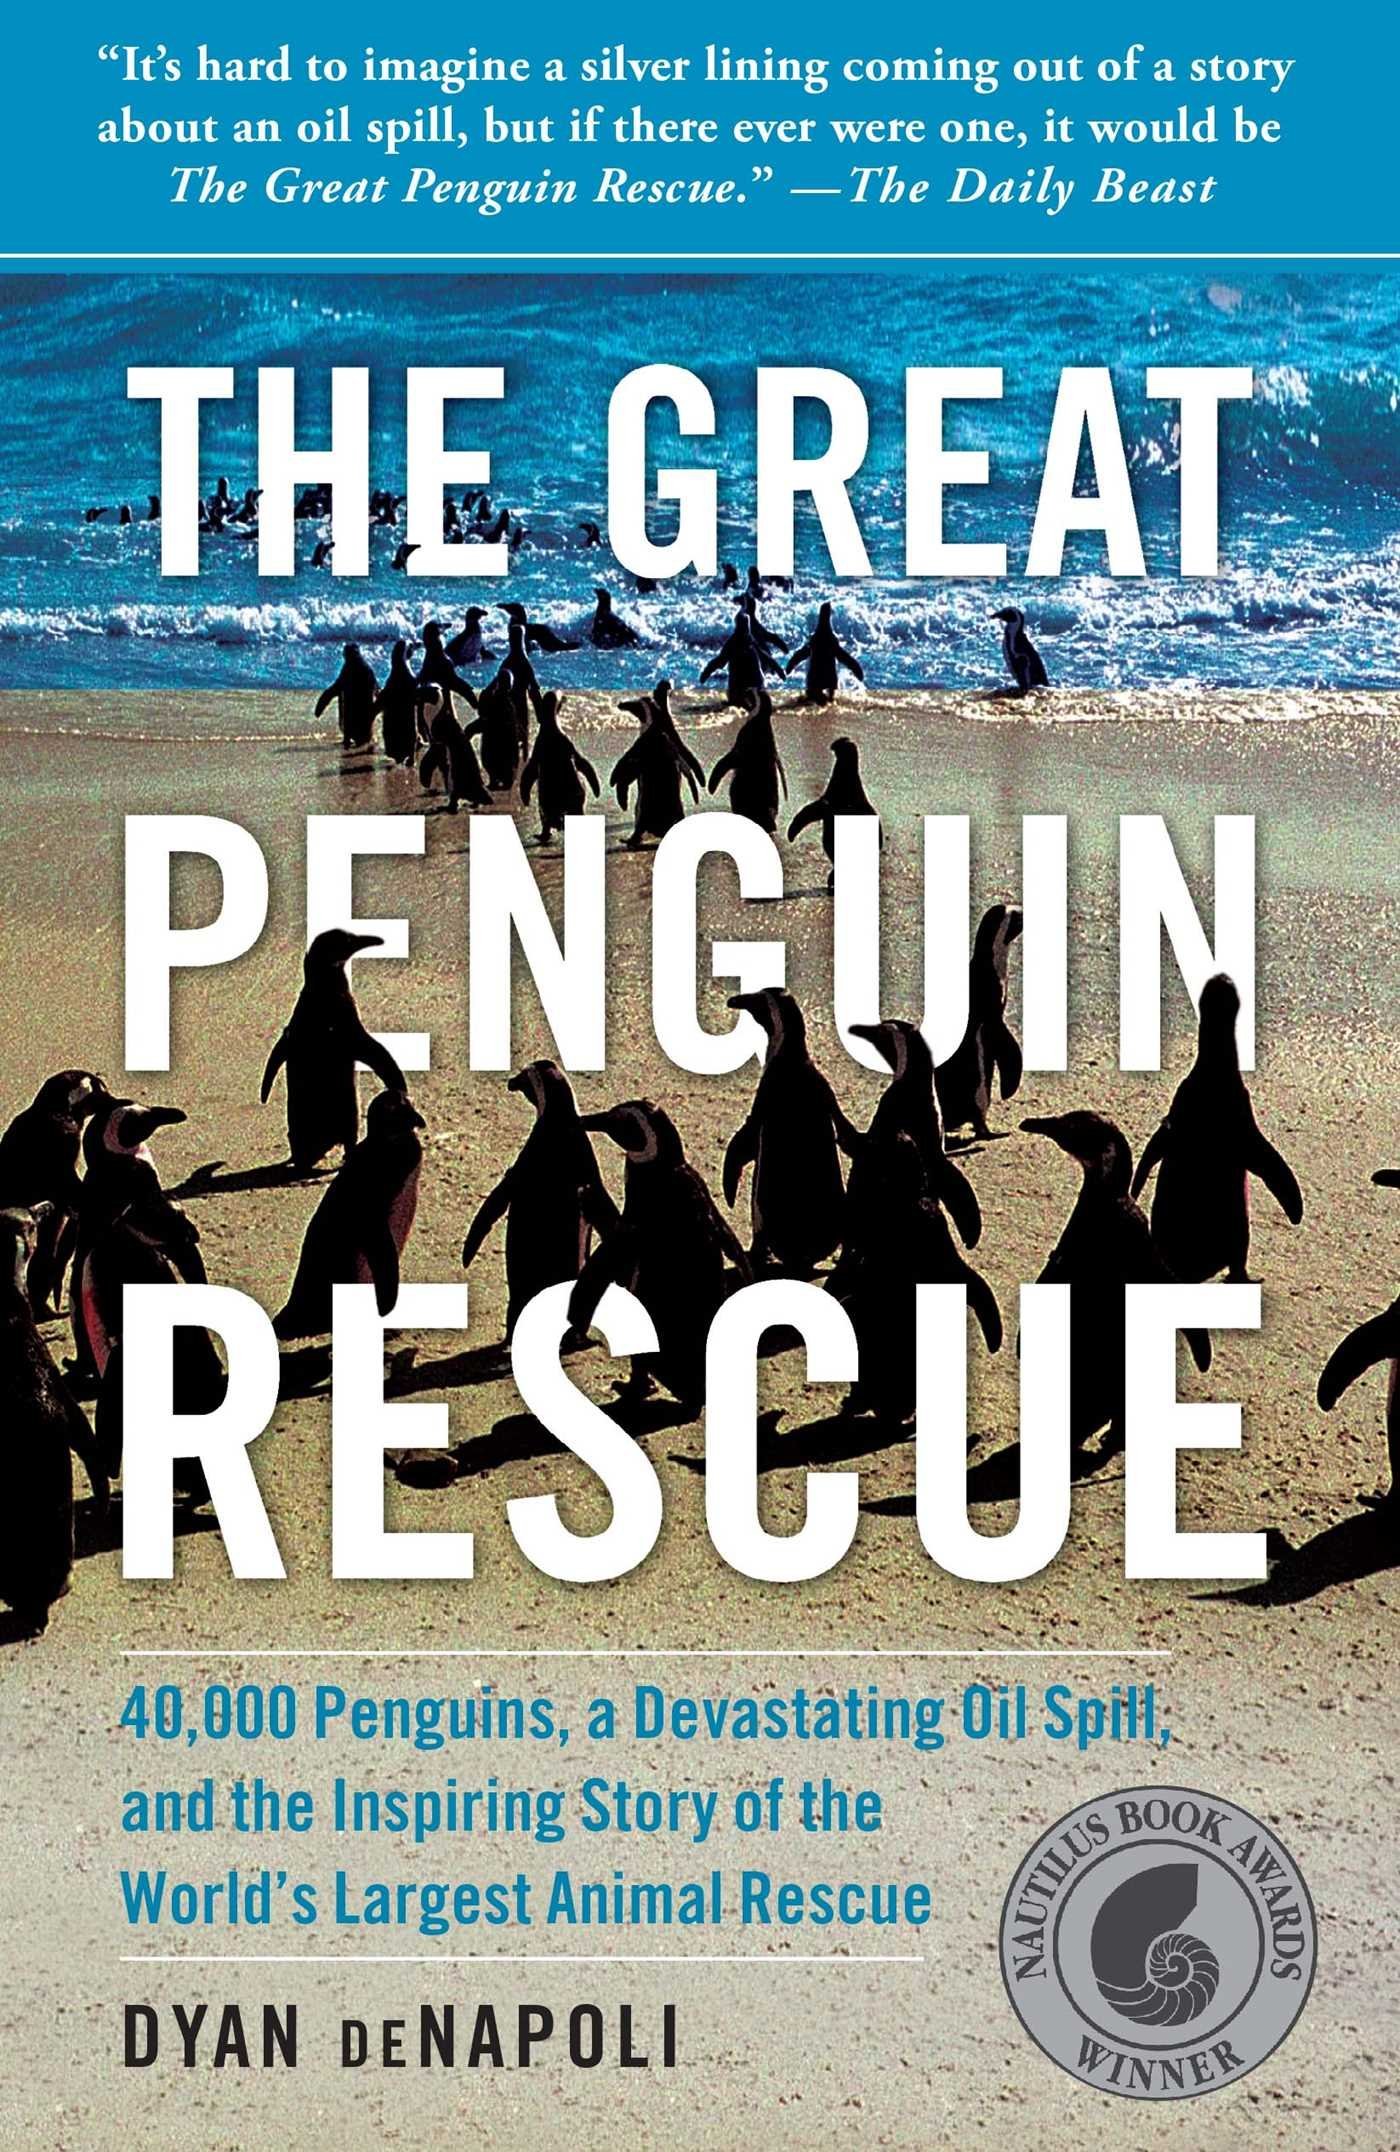 The Great Penguin Rescue: 40,000 Penguins, a Devastating Oil spill and the Inspiring Story of the World's Largest Animal Rescue